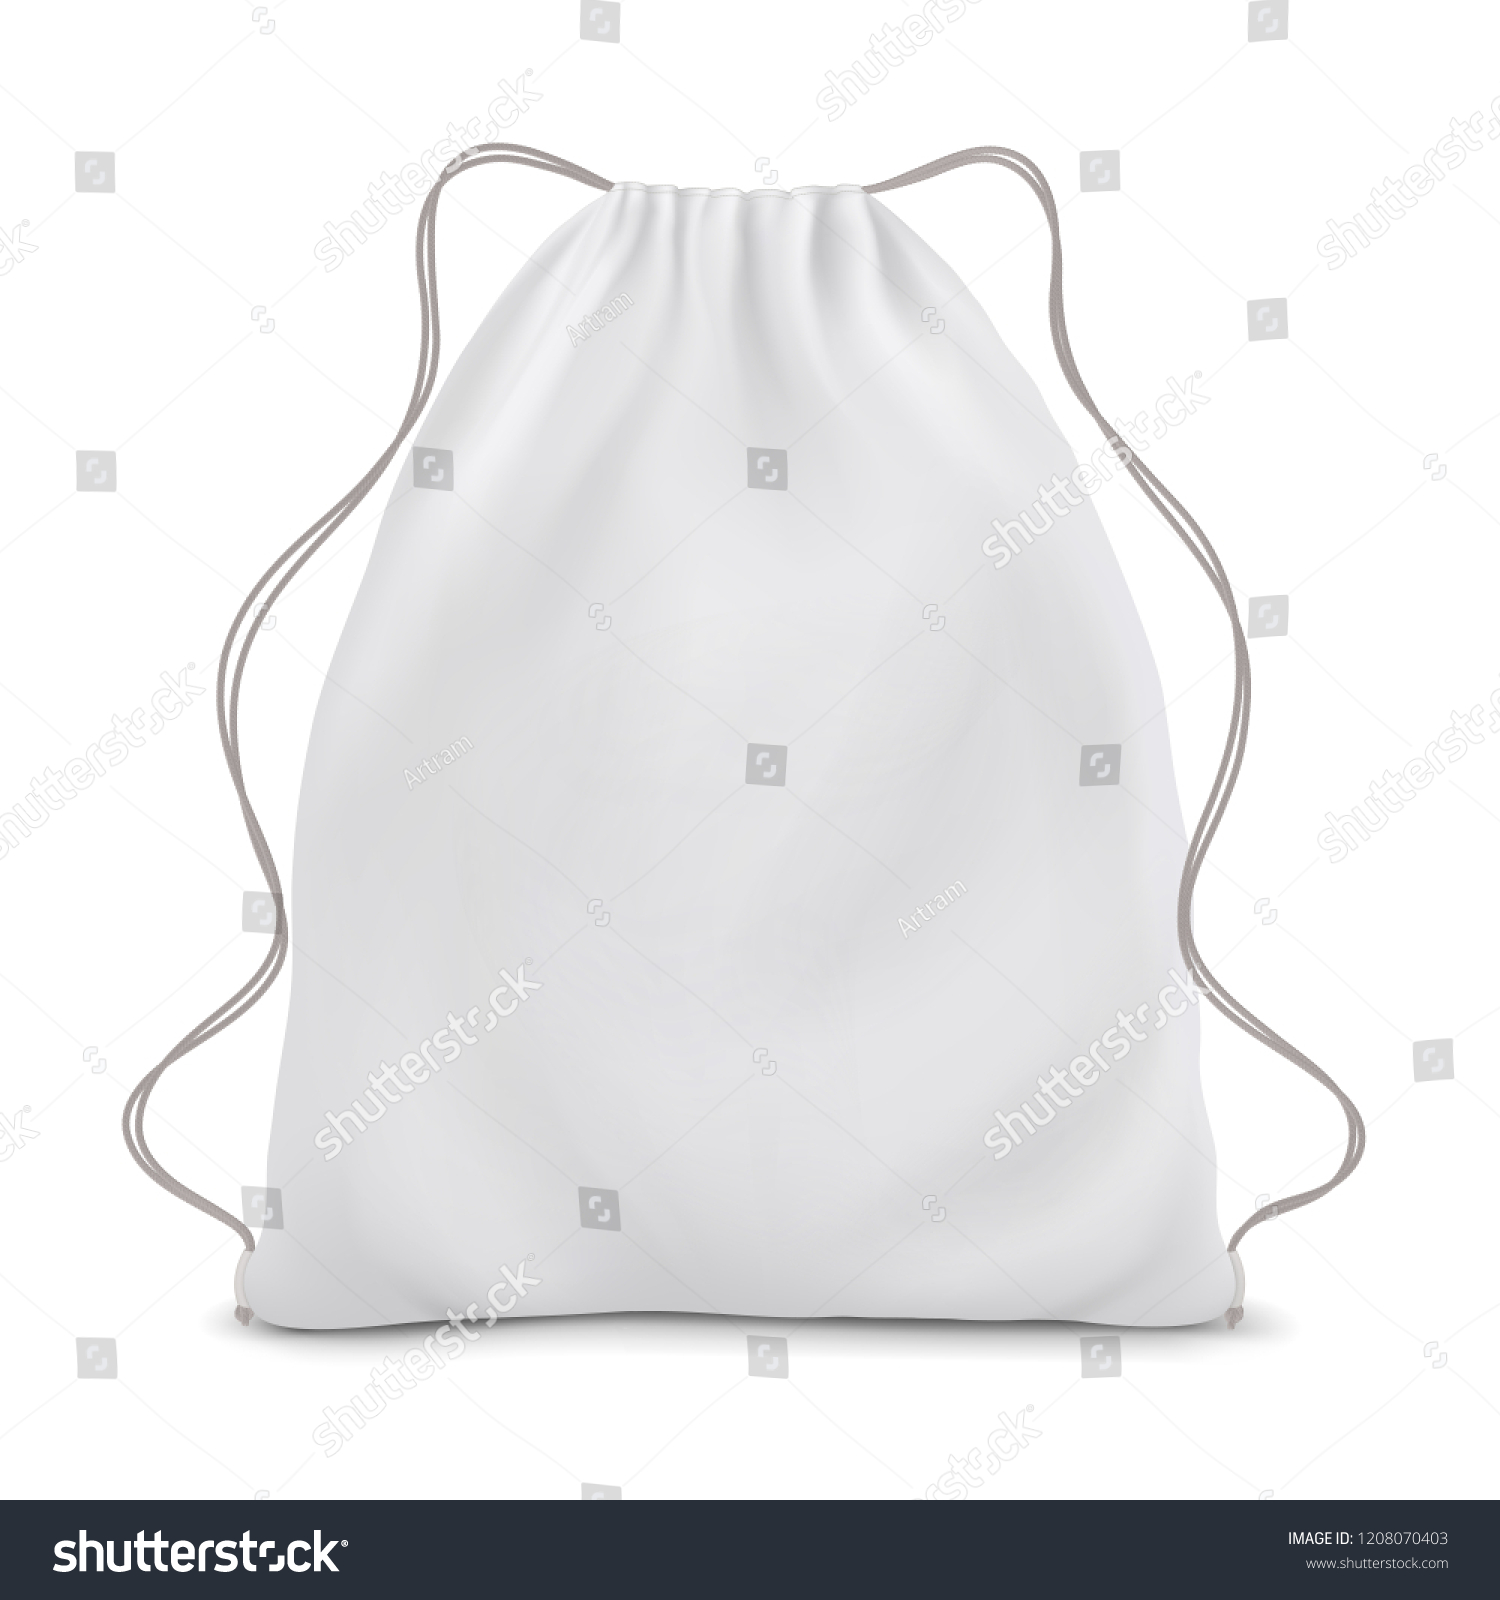 White Backpack Laces Sport Bag Mockup Stock Vector (Royalty Free ...